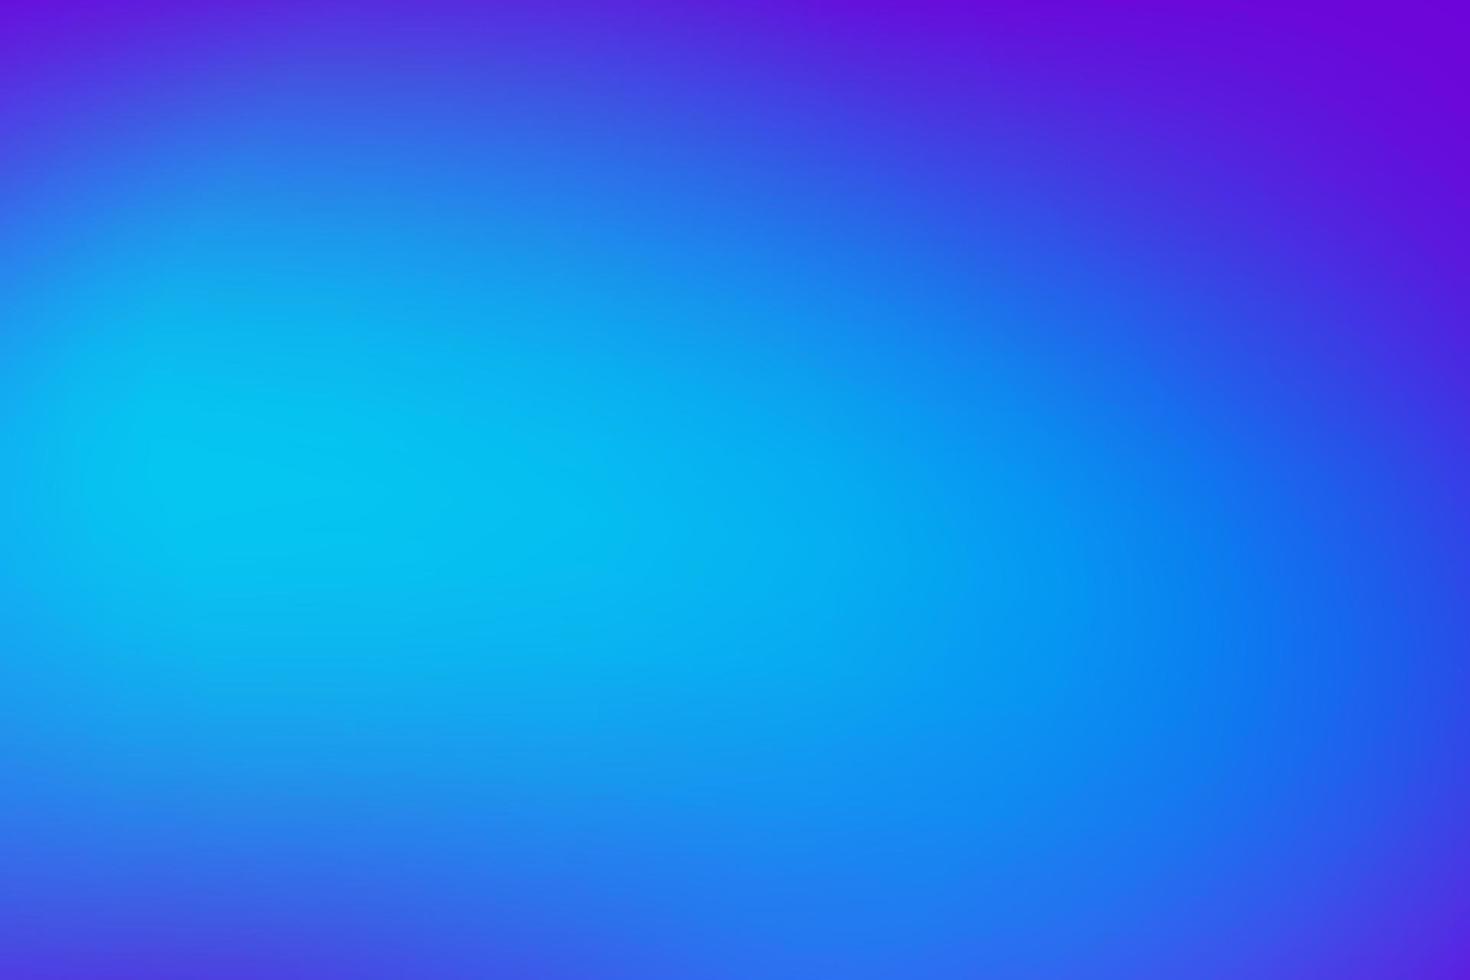 Modern gradient background with vibrant colors vector